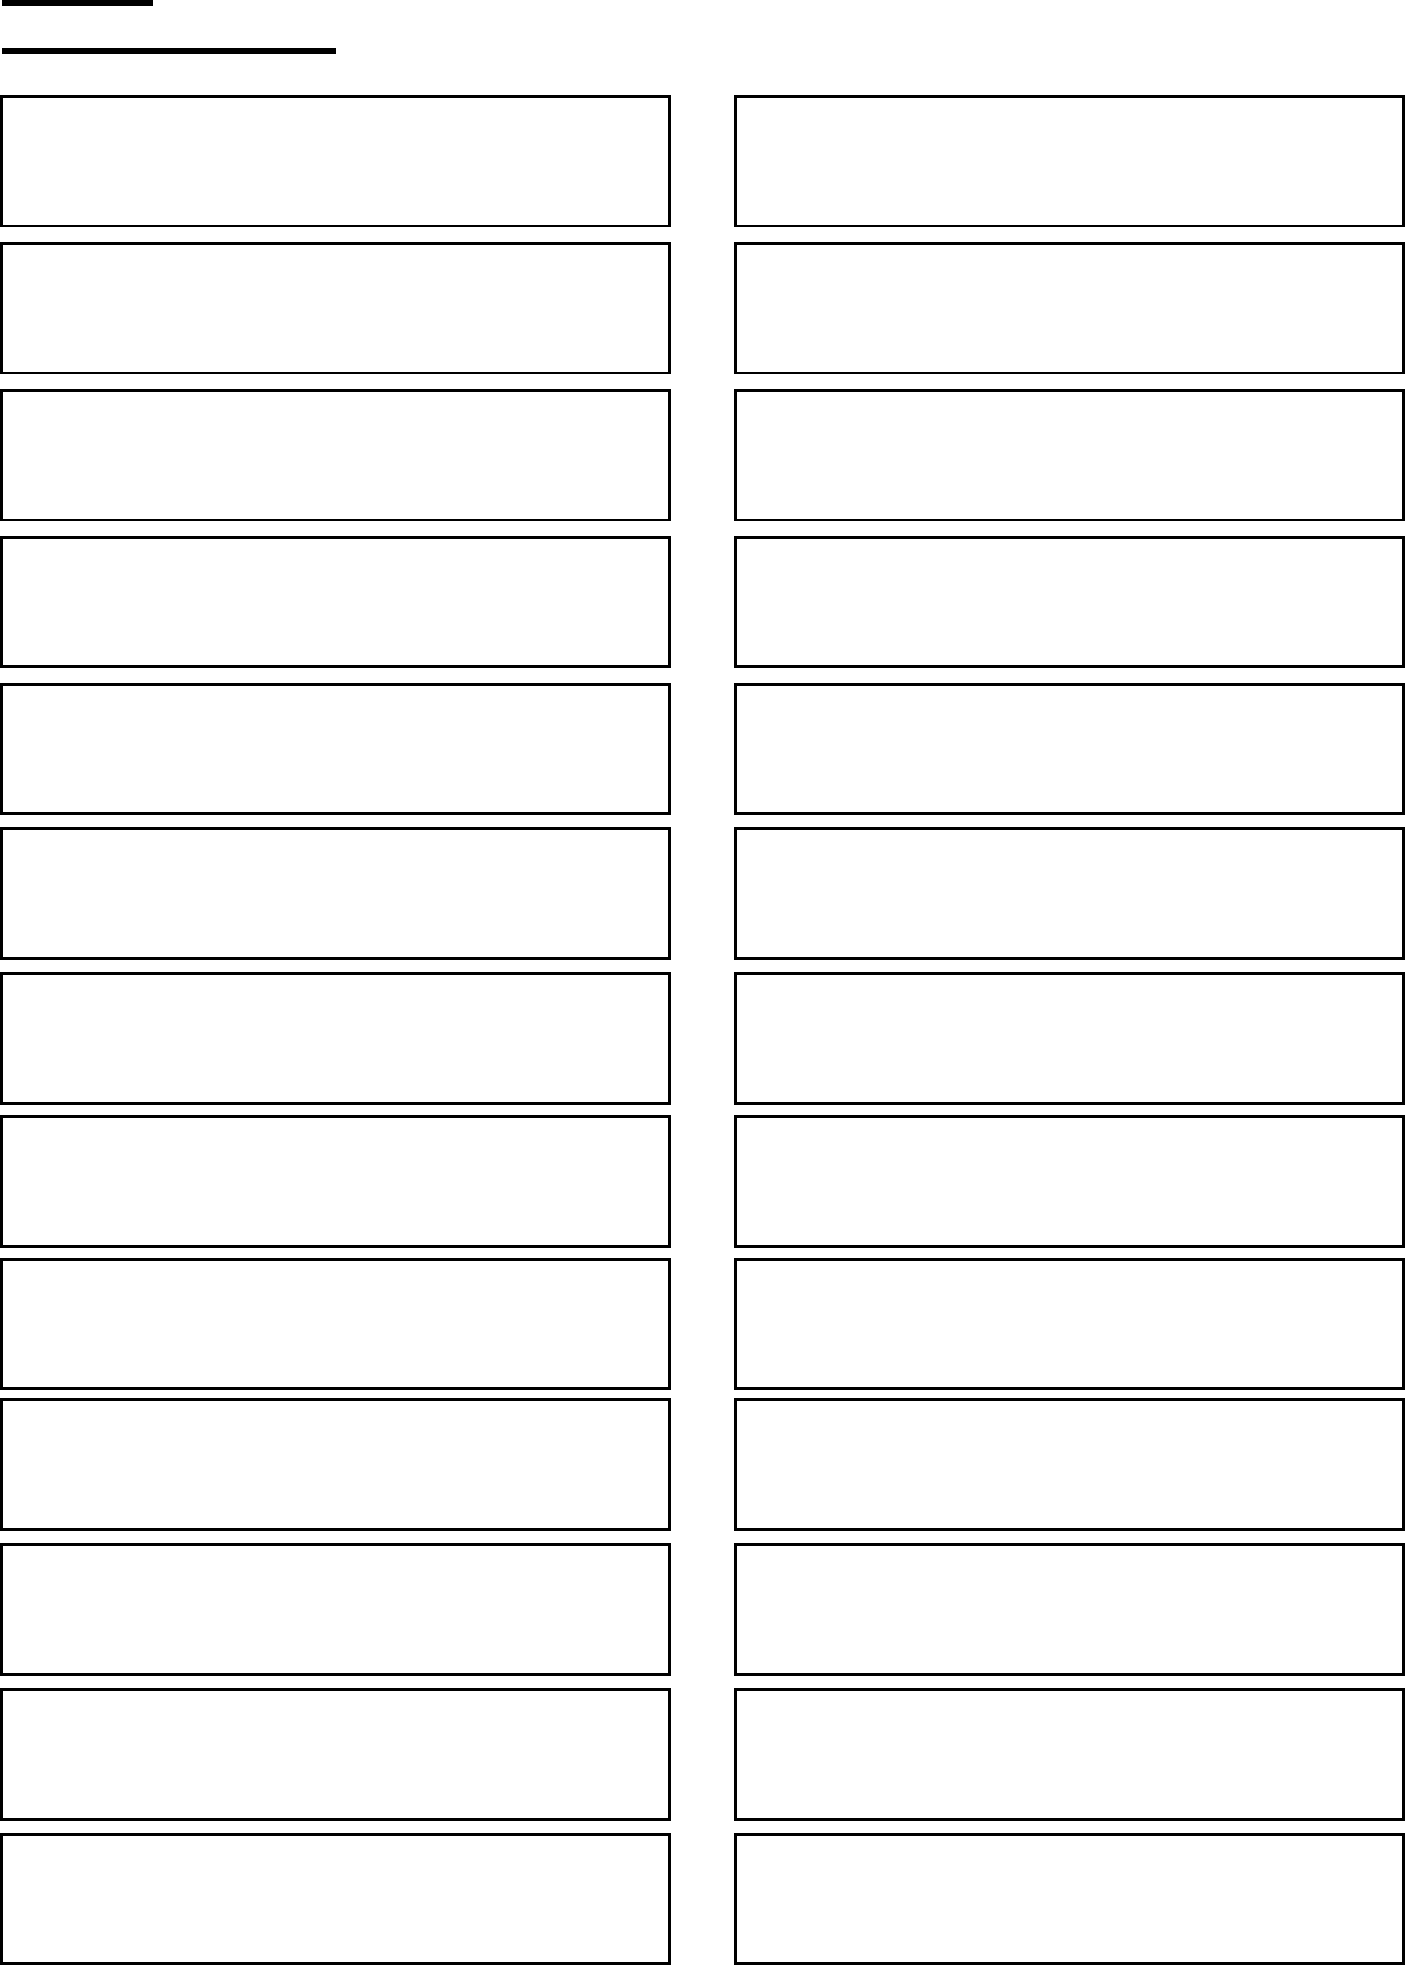 Bus Seating Chart Template